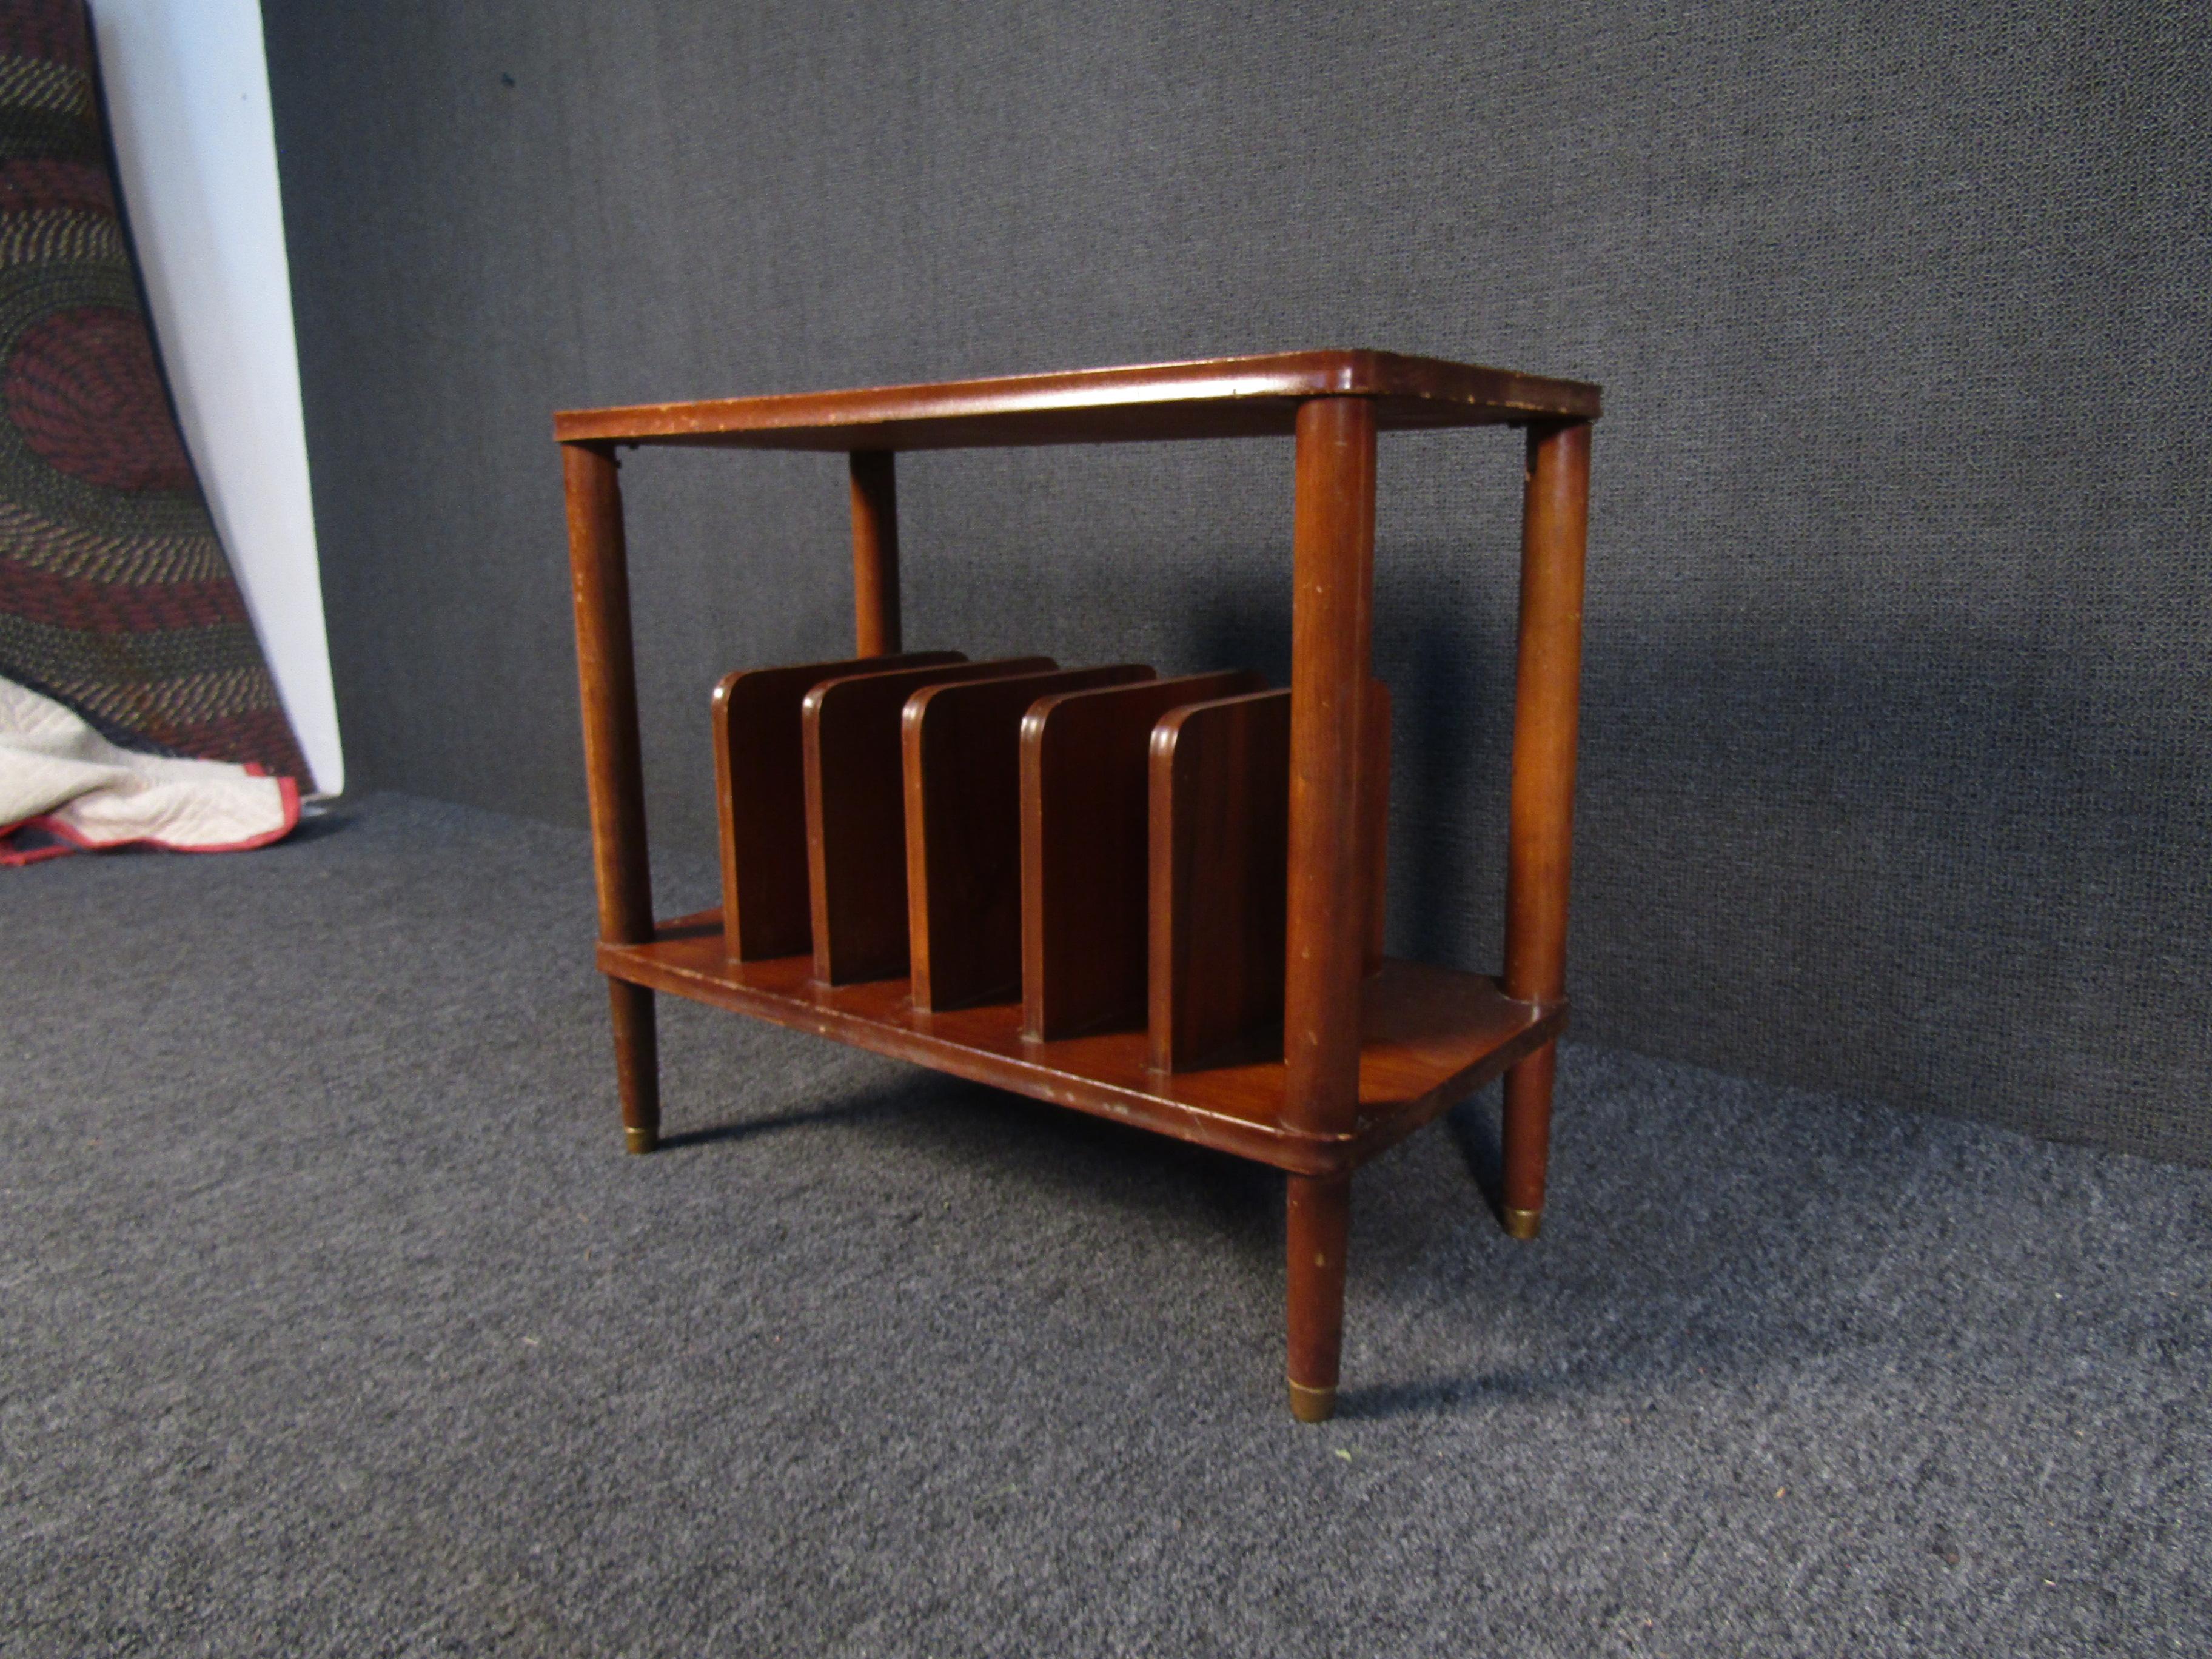 With rich walnut woodgrain and brass footing, this side table offers plenty of classic Mid-Century Modern style. The lower tier of the table holds a magazine rack, making this side table perfect for a living room or reading room. Please confirm item